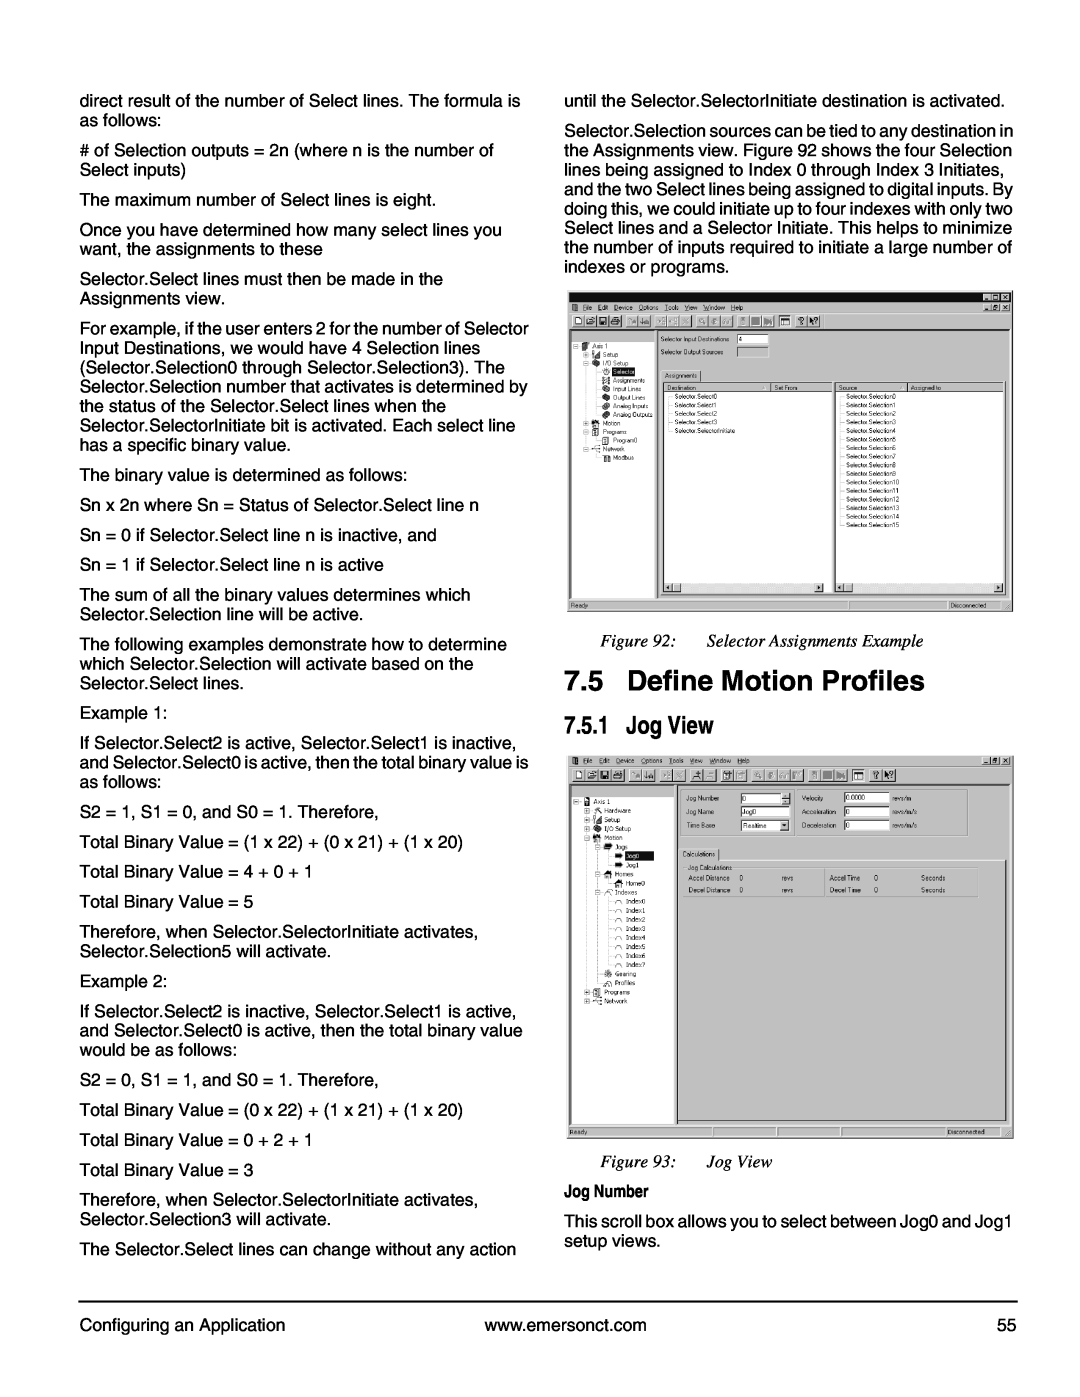 Emerson P/N 400361-00 manual Define Motion Profiles, Jog View, Selector Assignments Example 